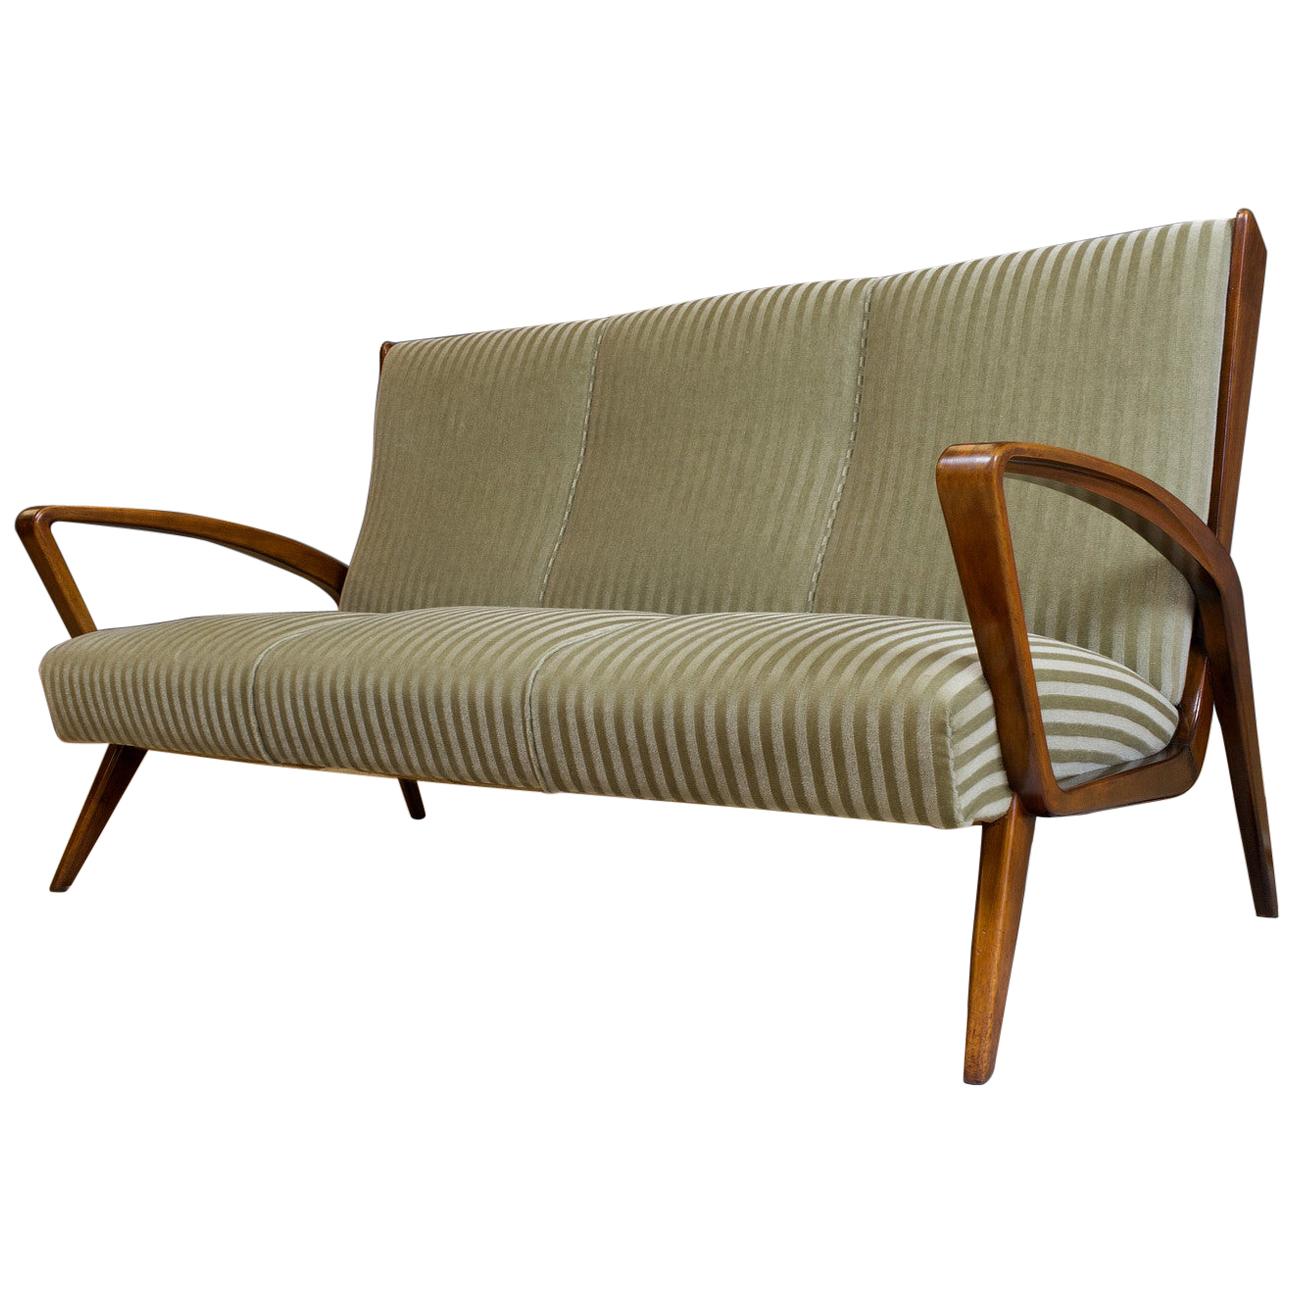 Art Deco Classic High Back Sofa by A.A.Patijn for Zijlstra 1950s Walnut Frame